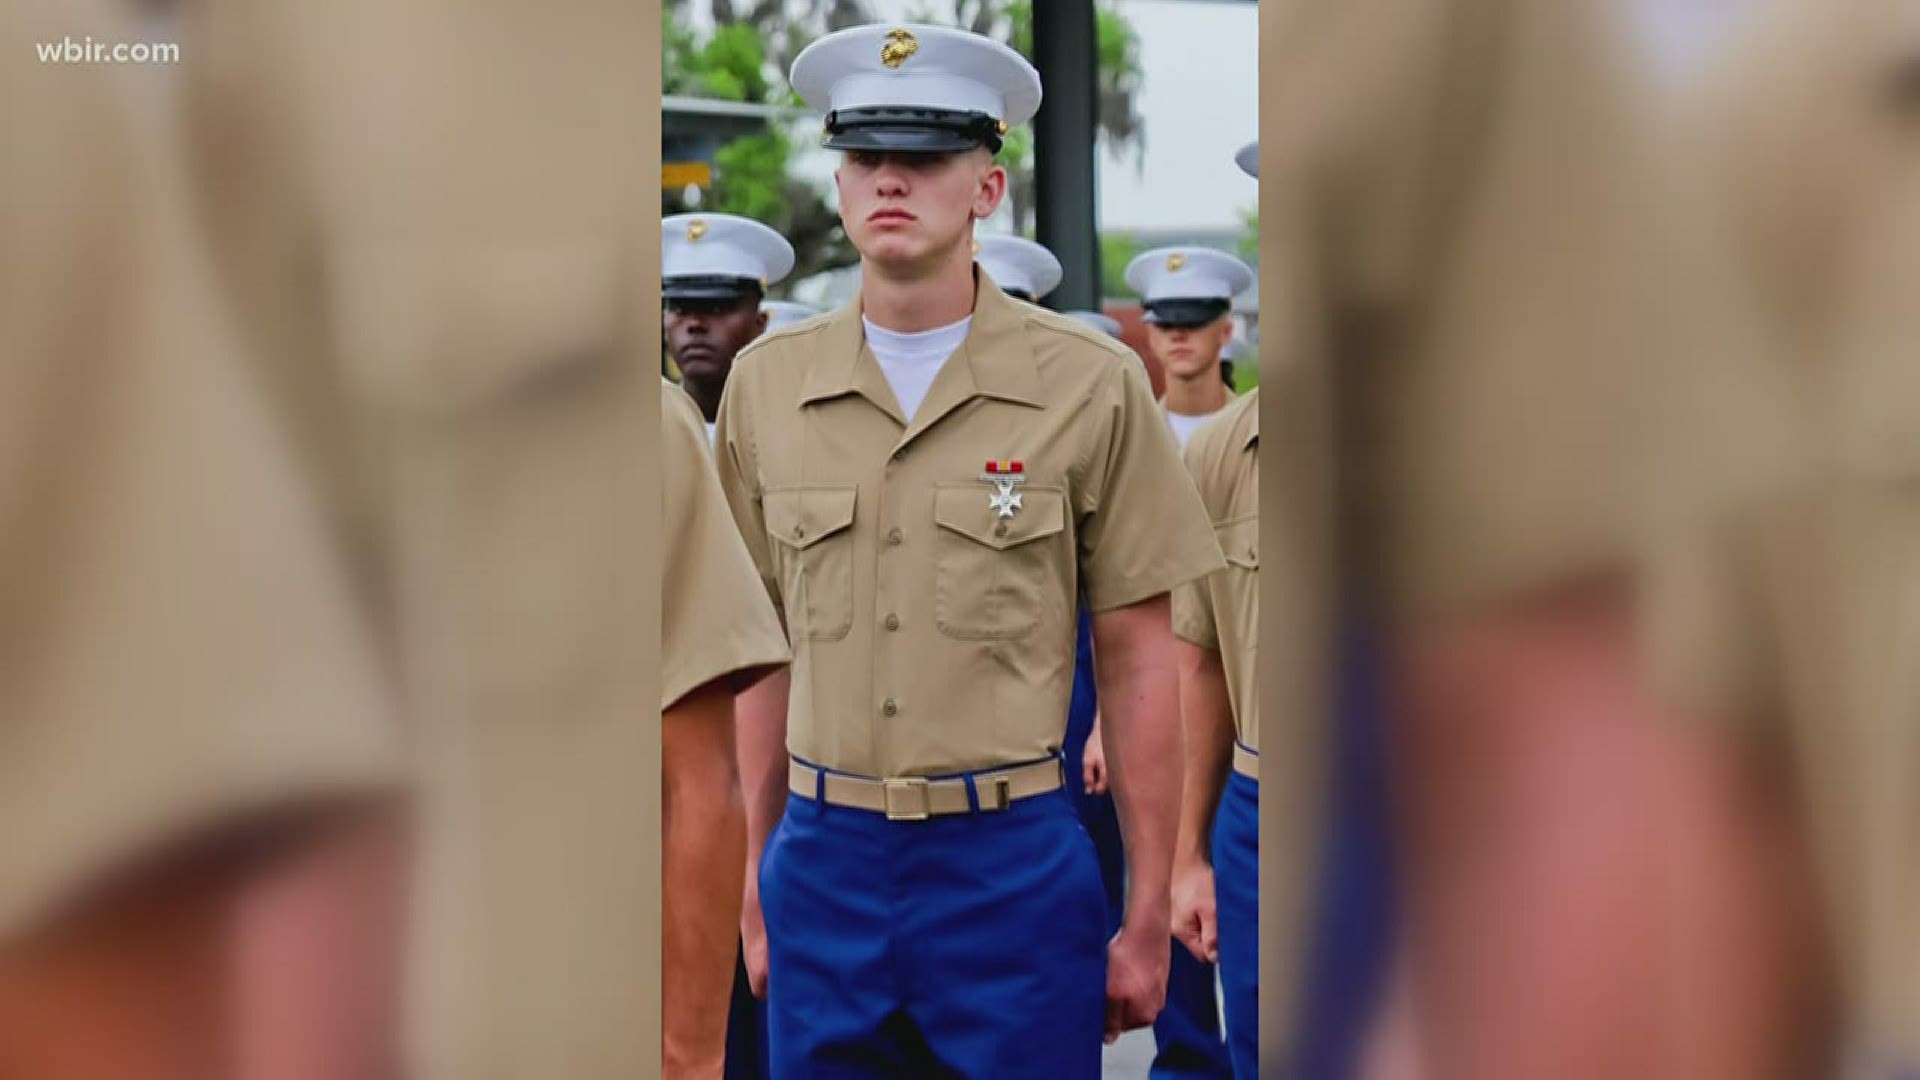 Spencer Mann recently graduated from Marine boot camp. Because of the coronavirus, his family could not attend. He's going straight to combat training.